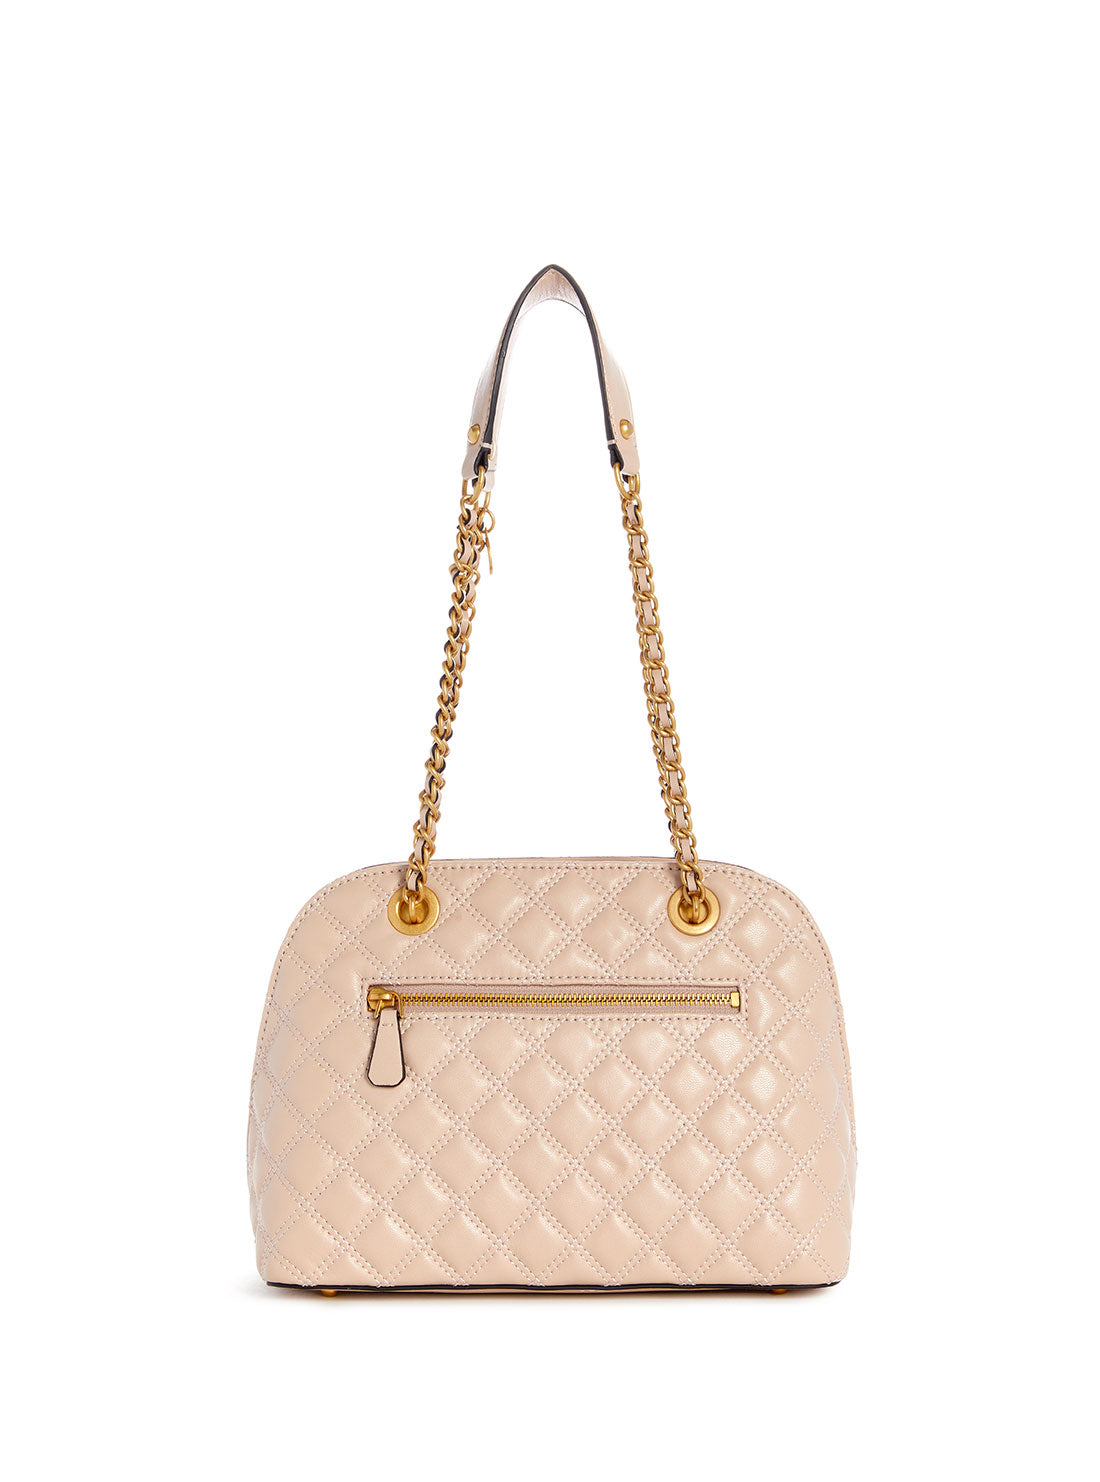 GUESS Light Beige Giully Dome Satchel Bag back view